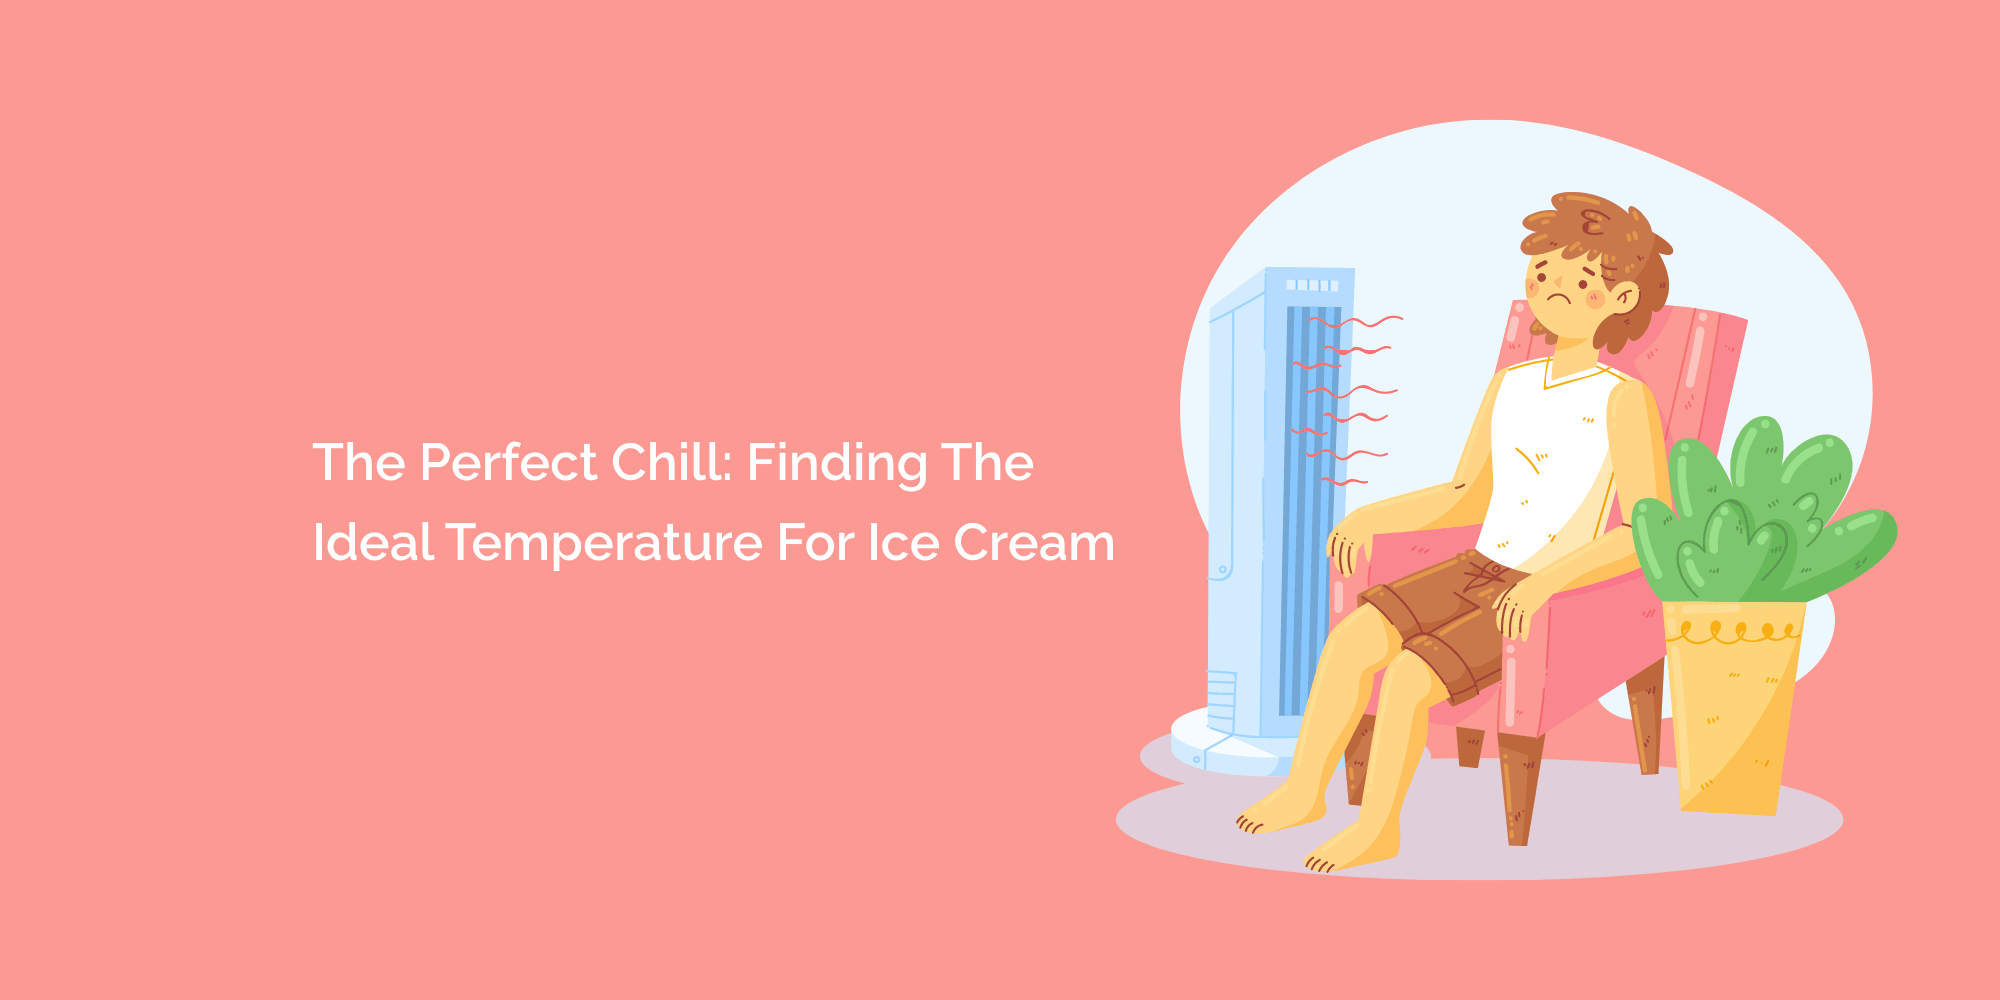 The Perfect Chill: Finding the Ideal Temperature for Ice Cream